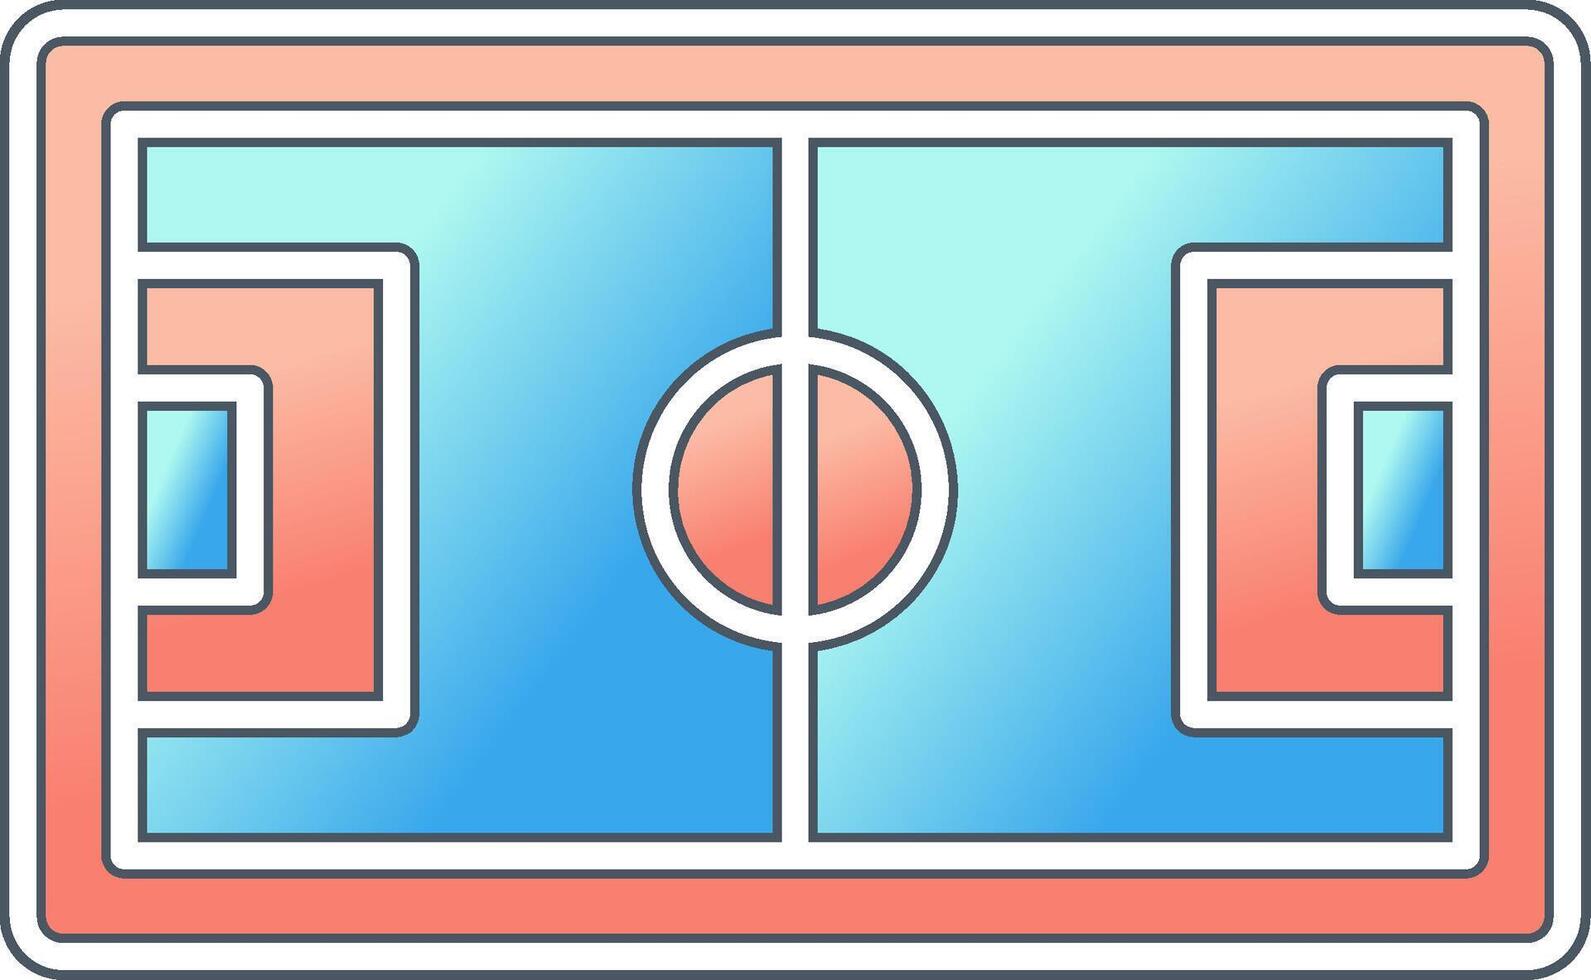 Football Pitch Vector Icon